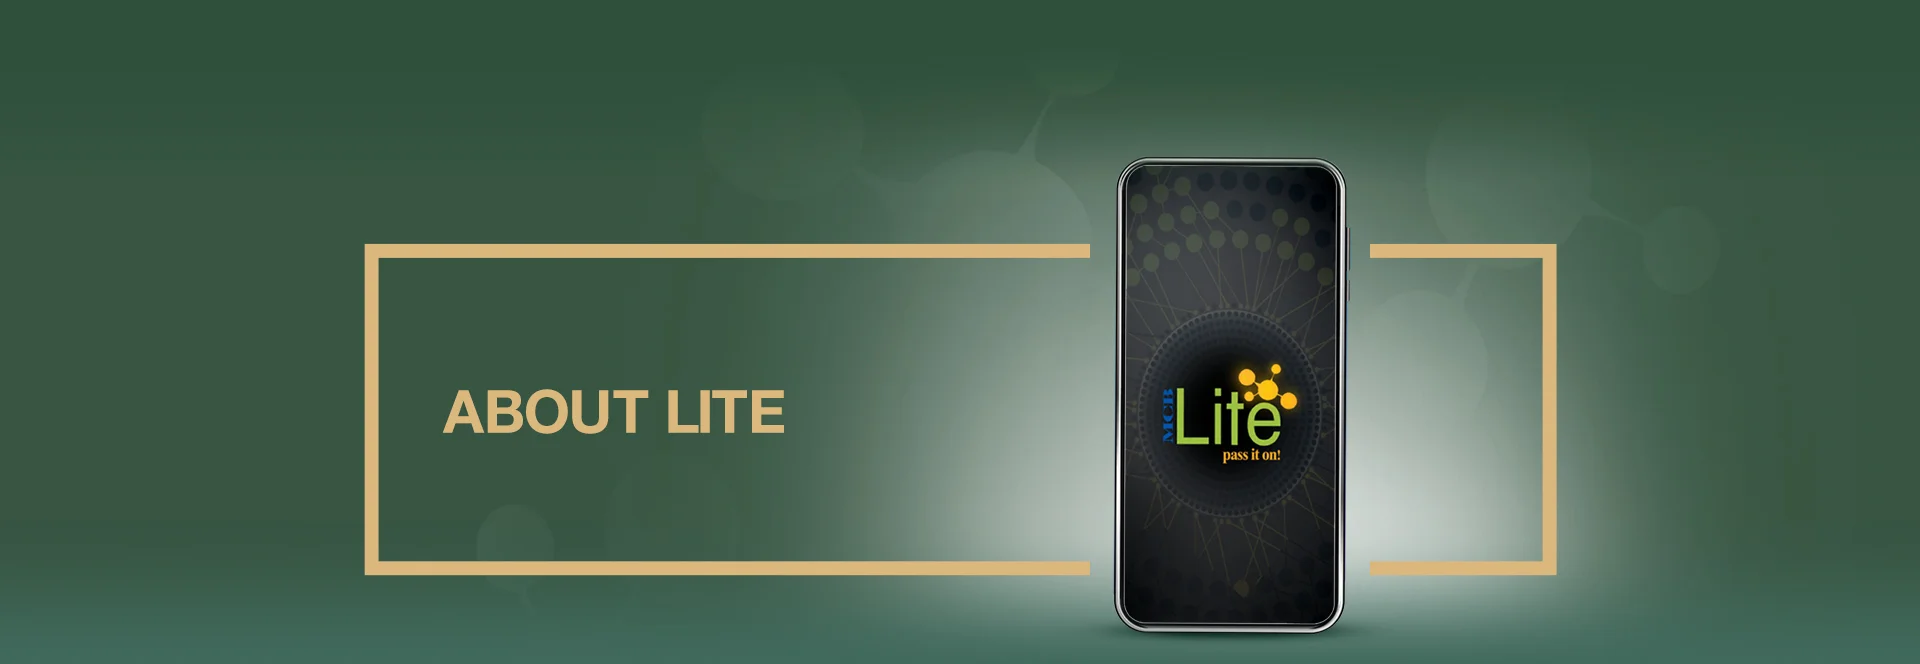 About Lite